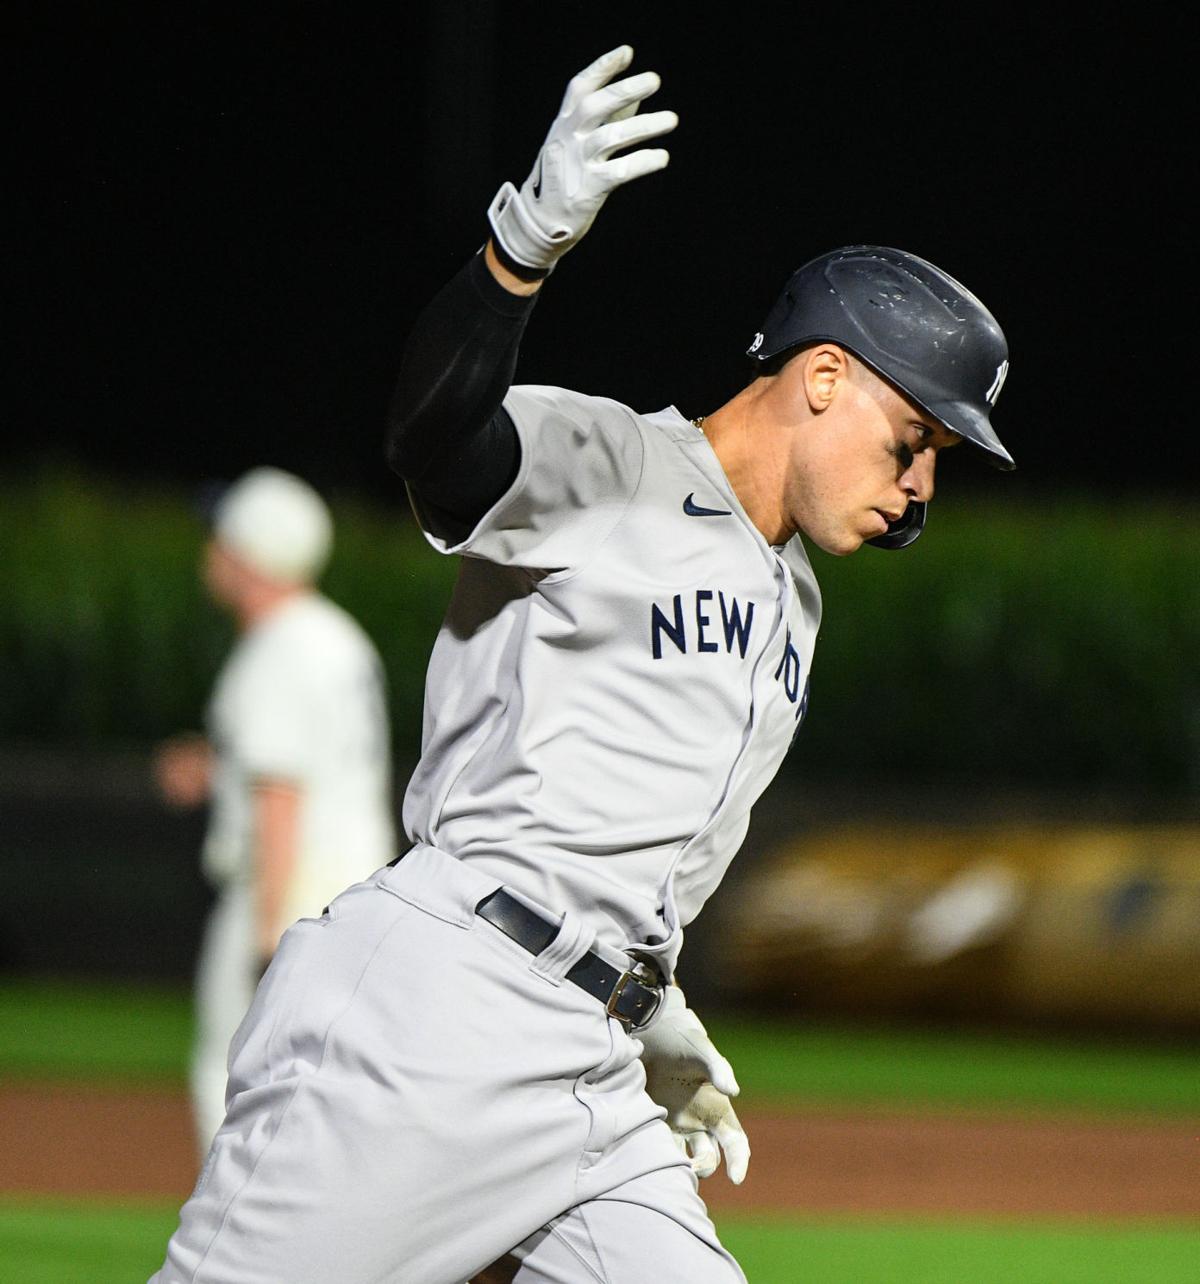 Photos: White Sox beat Yankees 9-8 in the Field of Dreams game